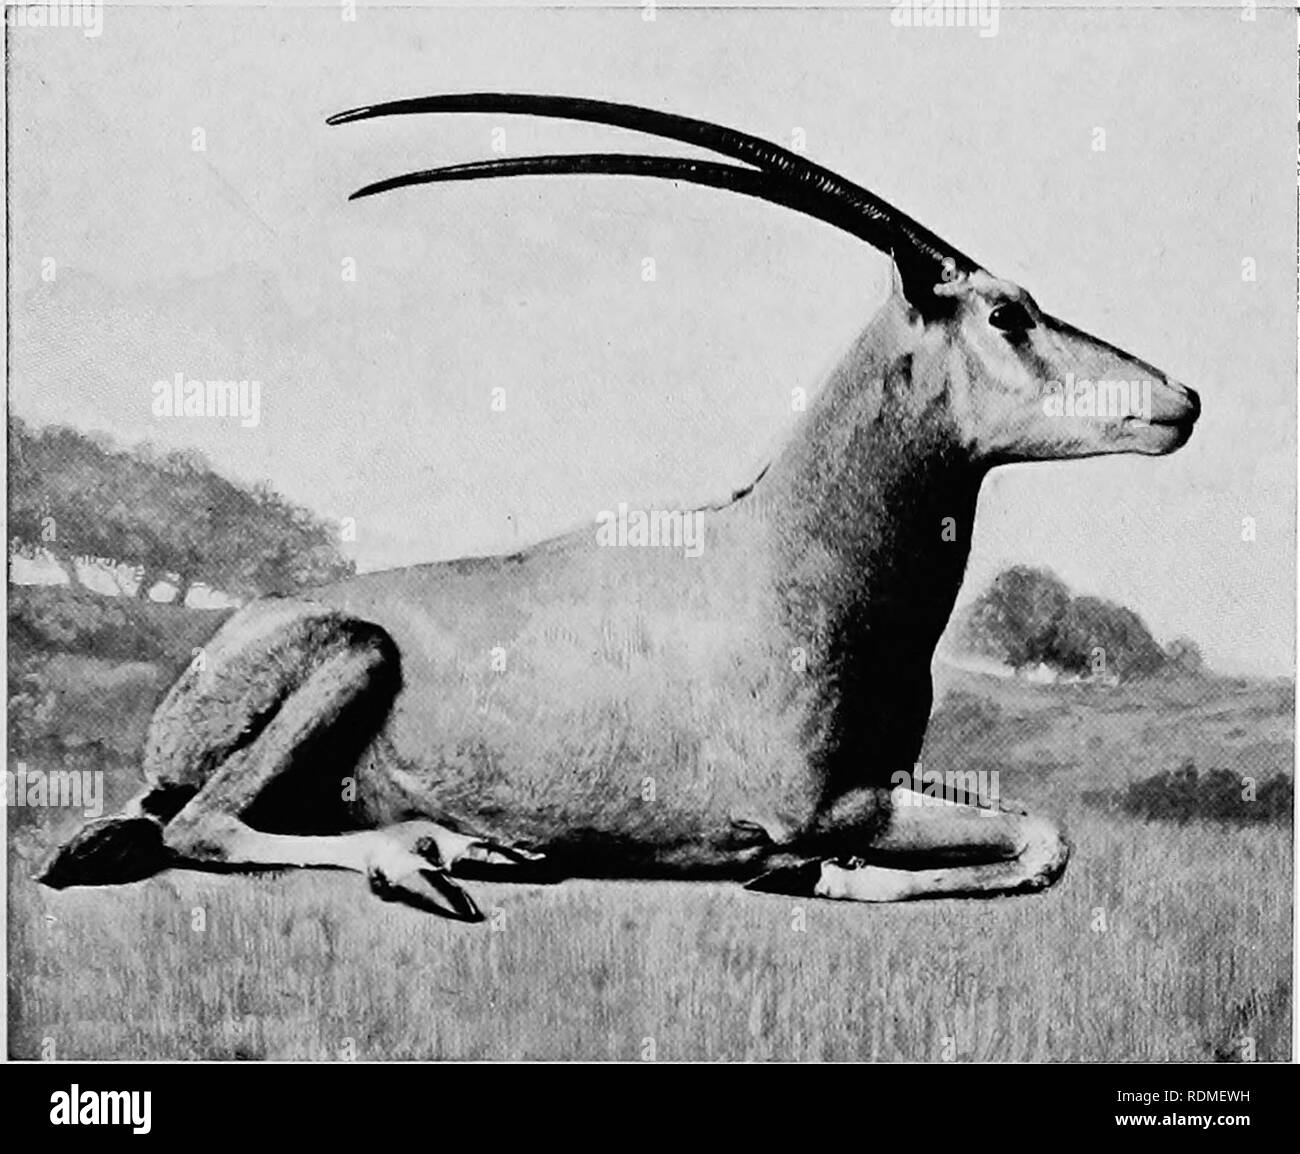 Mammals of other lands;. Mammals. 228 THE LIVING ANIMALS OF THE WORLD.  Photo by S. a. Payncy jiyitibury^ by ftrminion of the Hon, iValttr  Rothschild WHITE ORYX Found in Northern Africa